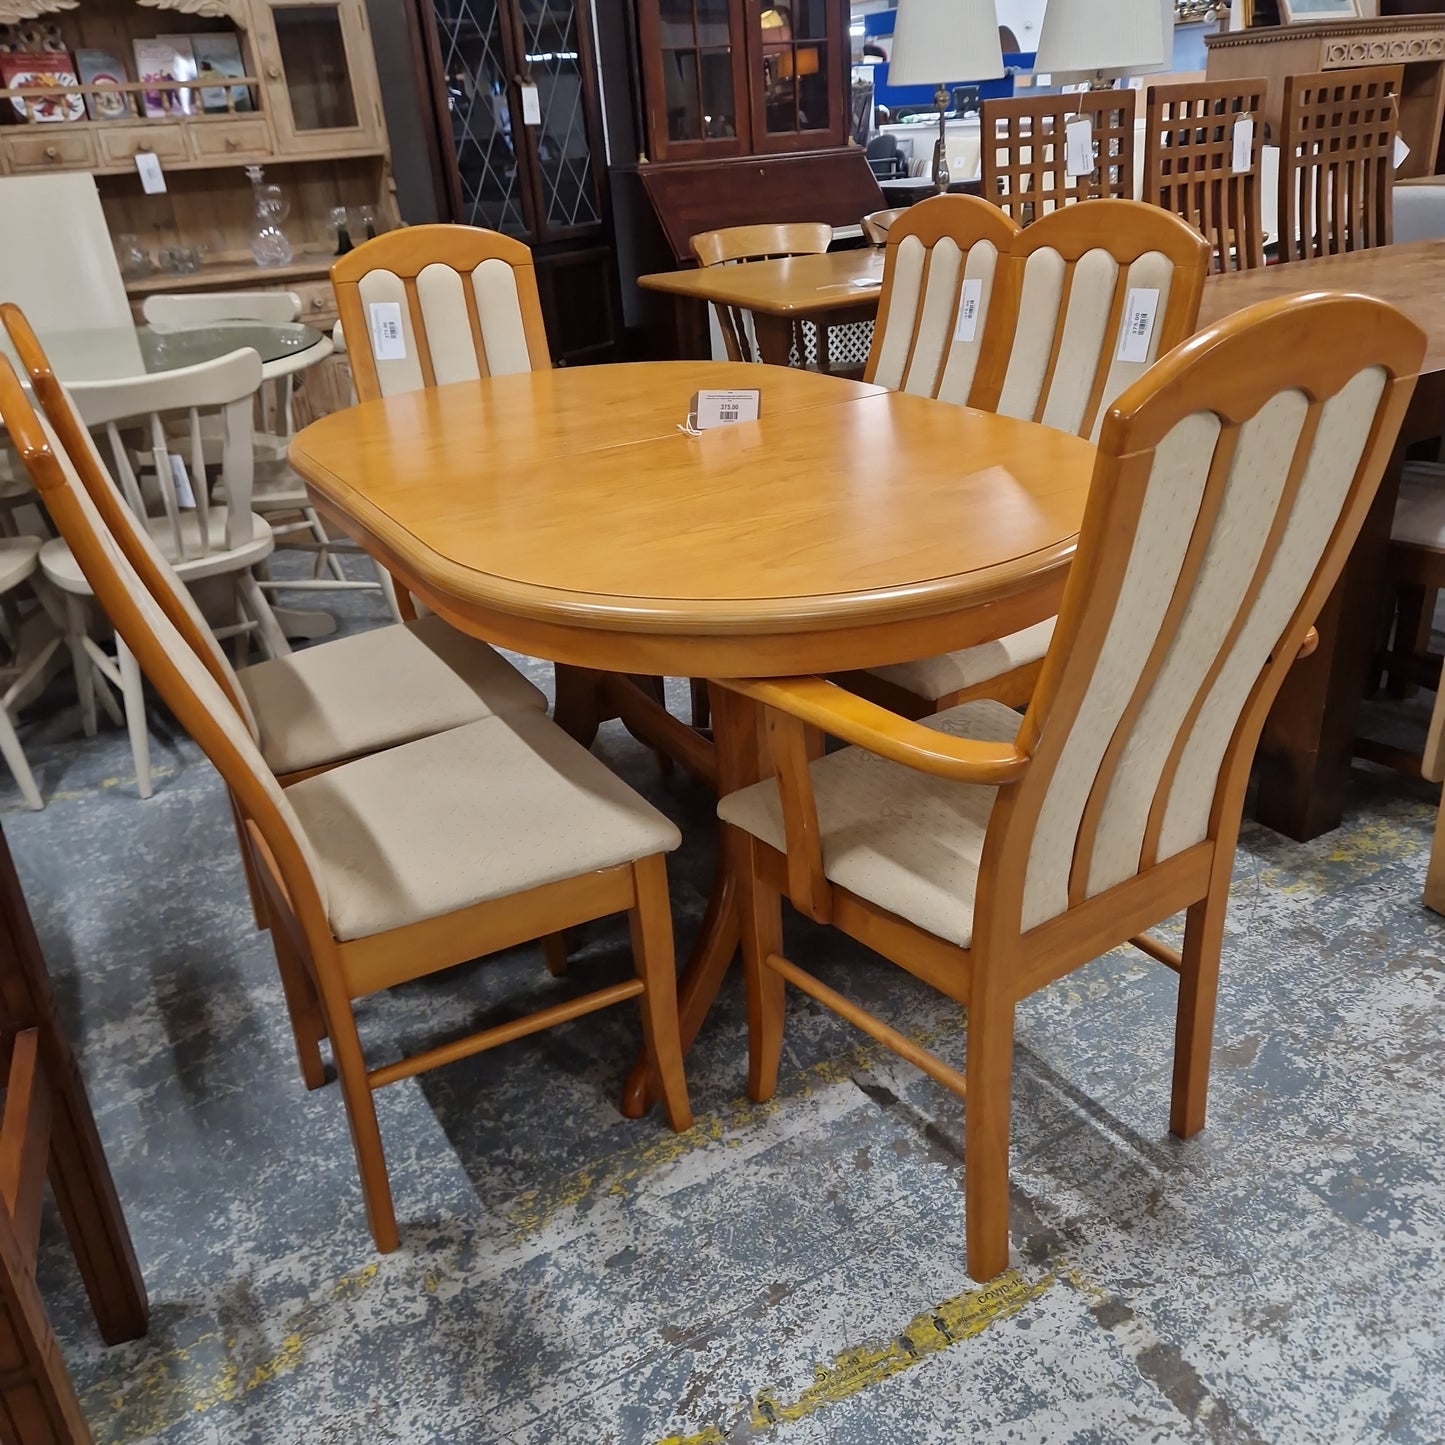 Oval beech extenable dining table complete with 4 no. chairs and 2 no. carvers with cream fabric seat and back  3124